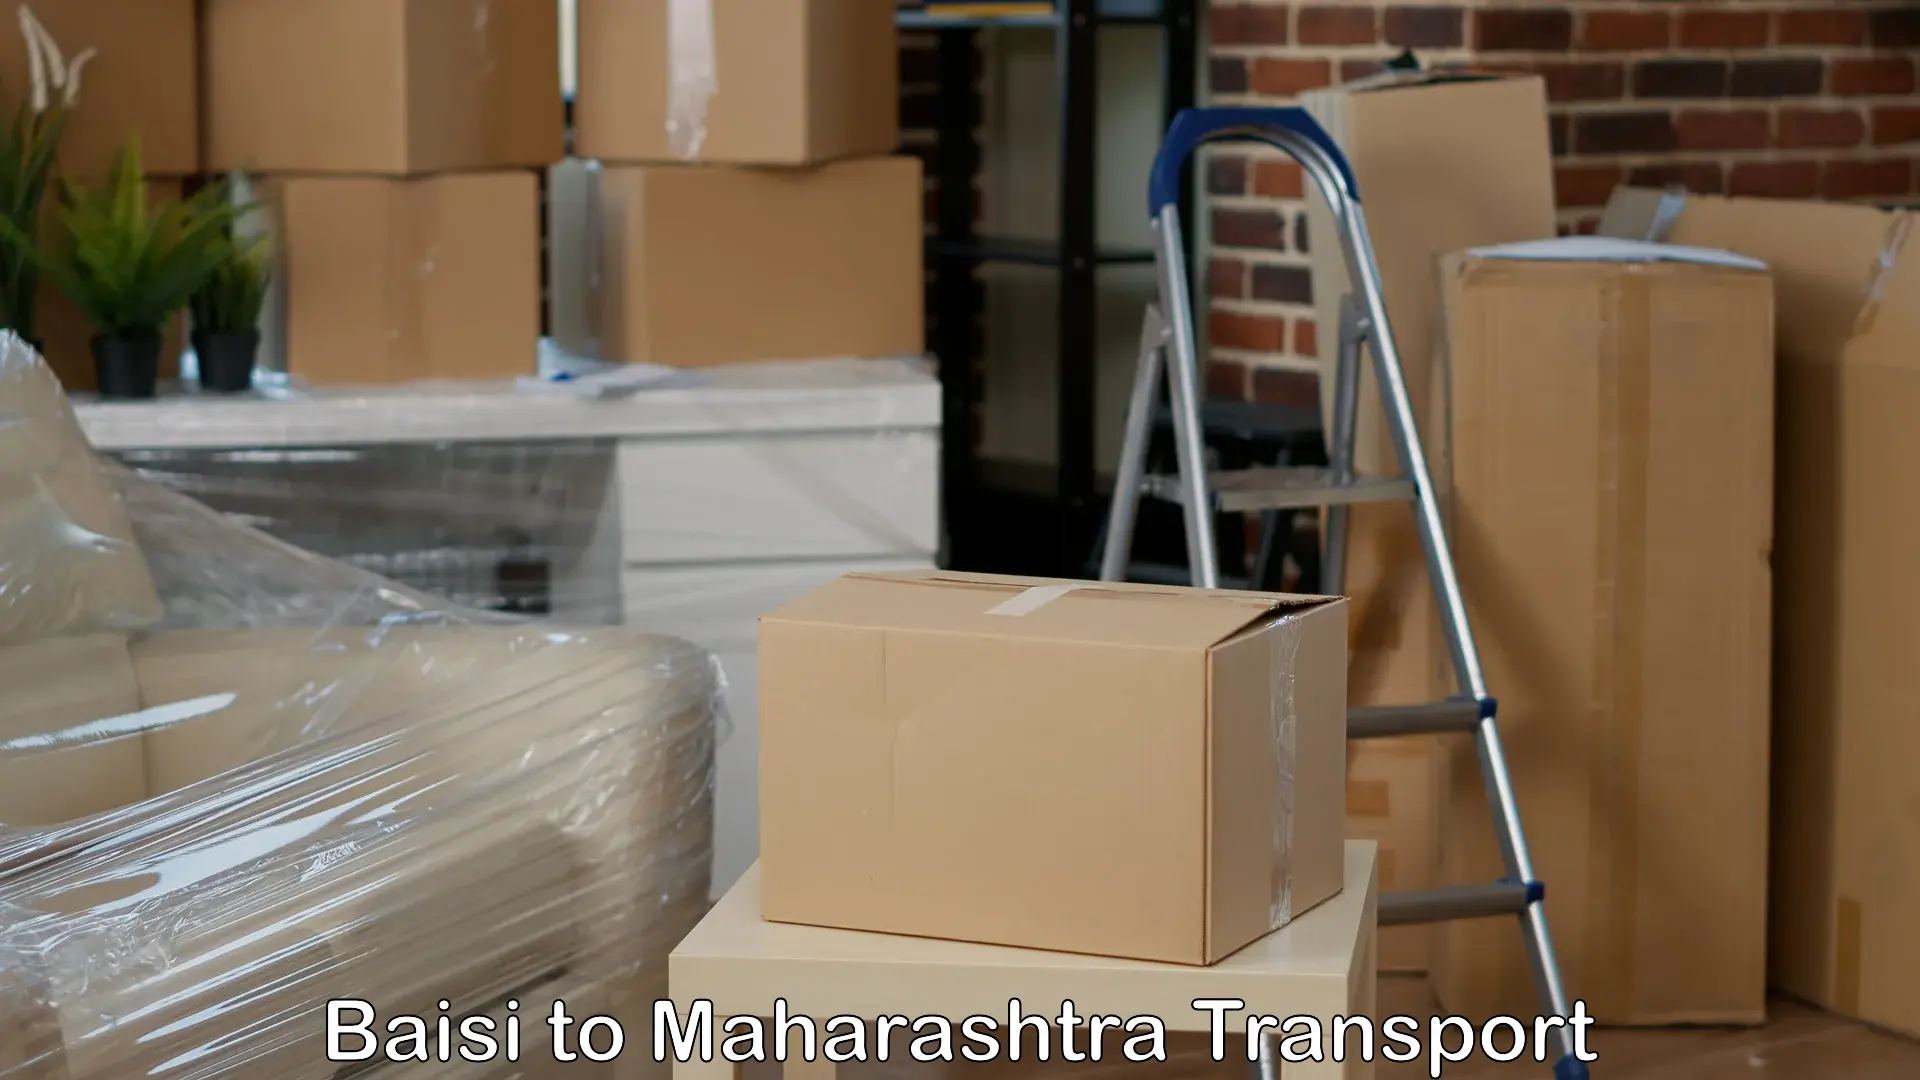 Truck transport companies in India Baisi to Bambavade